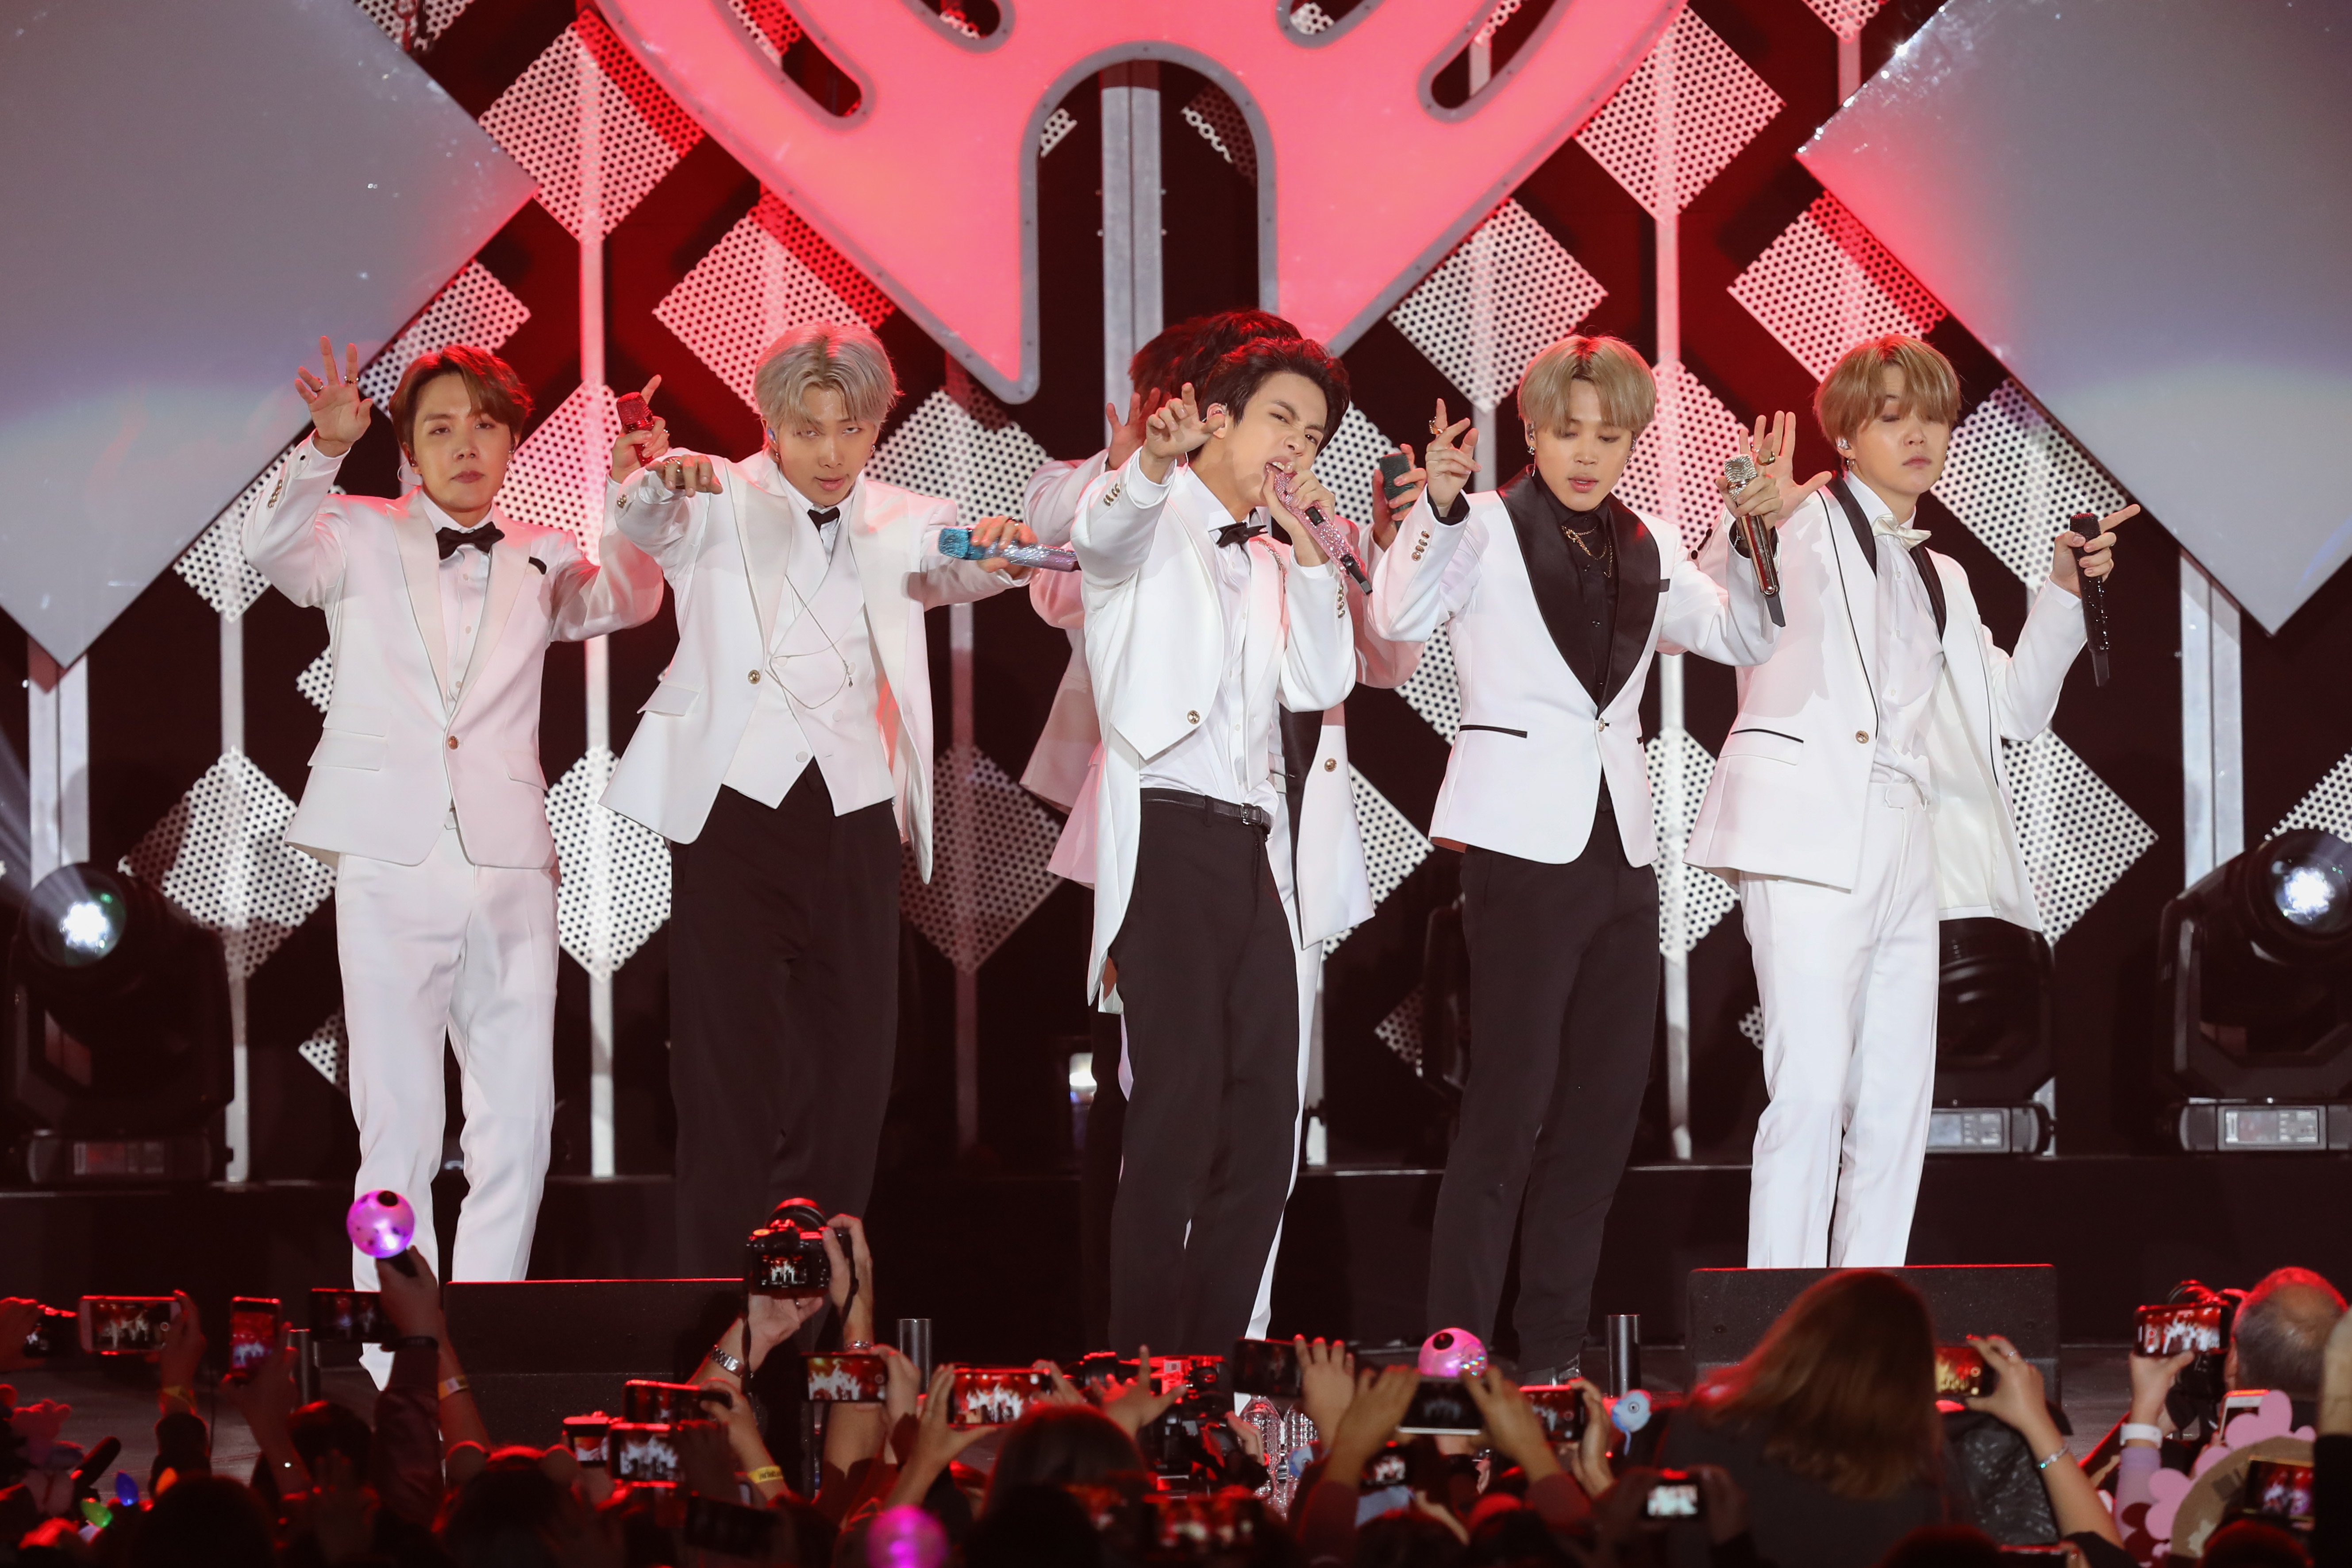 V, Suga, Jin, Jungkook, RM, Jimin, and J-Hope of BTS performs during the iHeartRadio KIIS FM's Jingle Ball dressed in white shirts and black and white pants